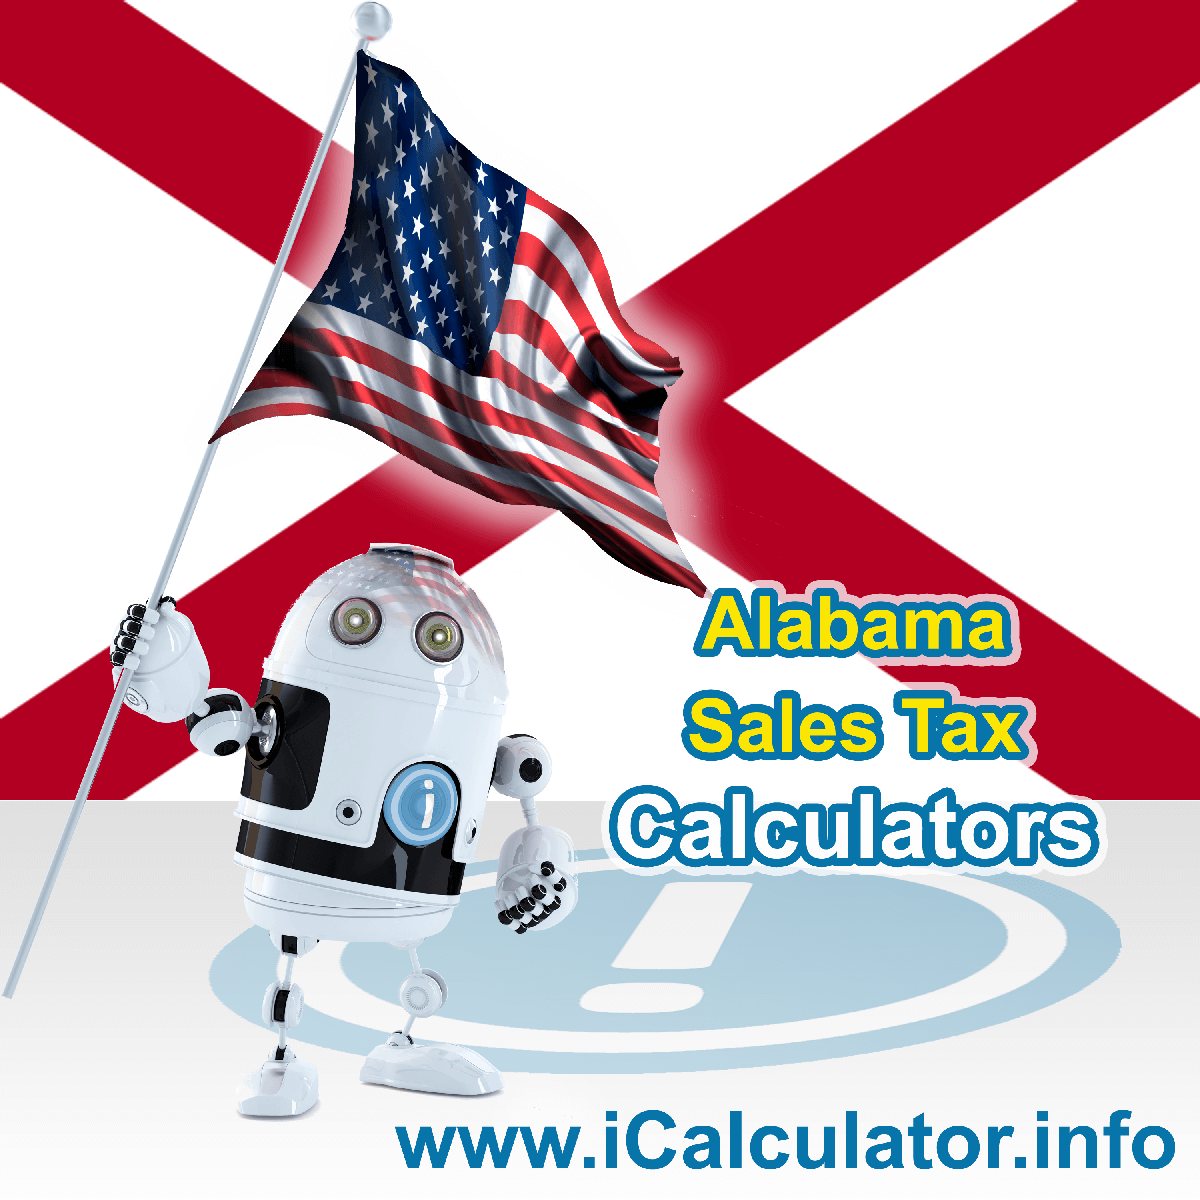 Alabama Sales Tax Comparison Calculator: This image illustrates a calculator robot comparing sales tax in Alabama manually using the Alabama Sales Tax Formula. You can use this information to compare Sales Tax manually or use the Alabama Sales Tax Comparison Calculator to calculate and compare Alabama sales tax online.